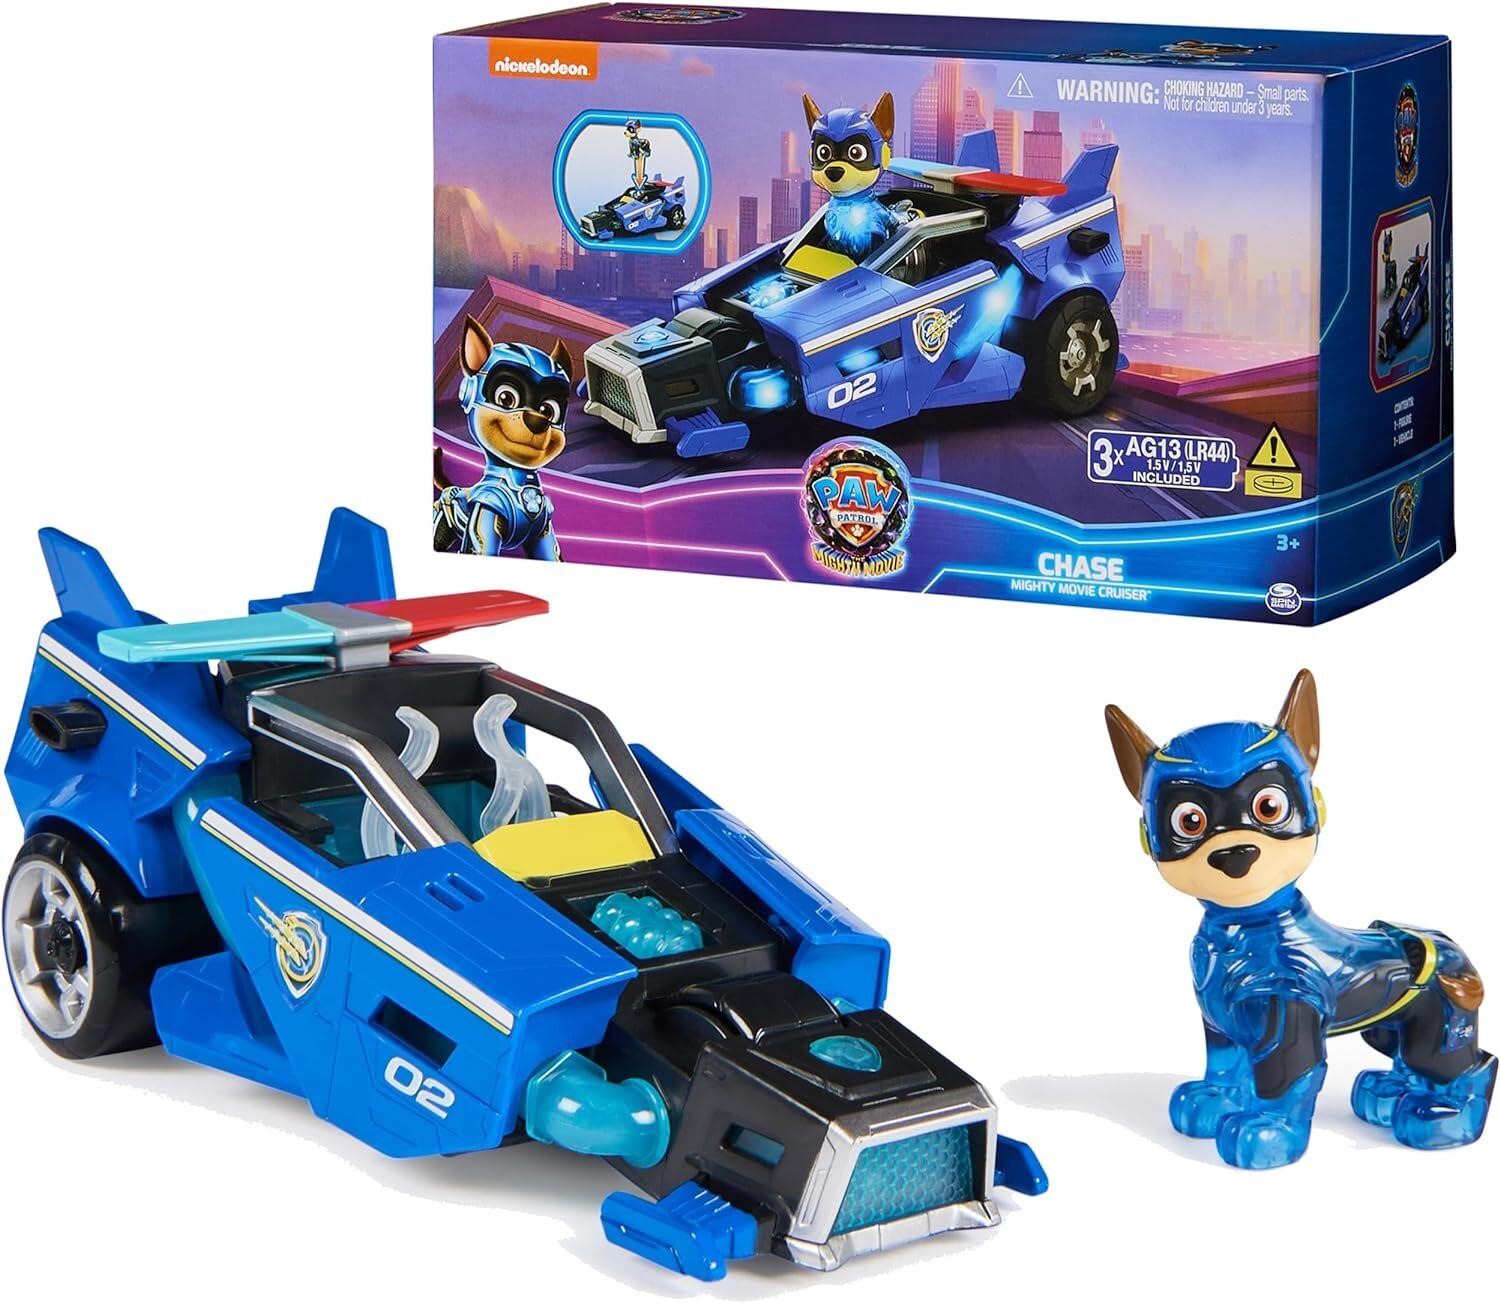 Paw Patrol: Chase Toy Car with Lights.